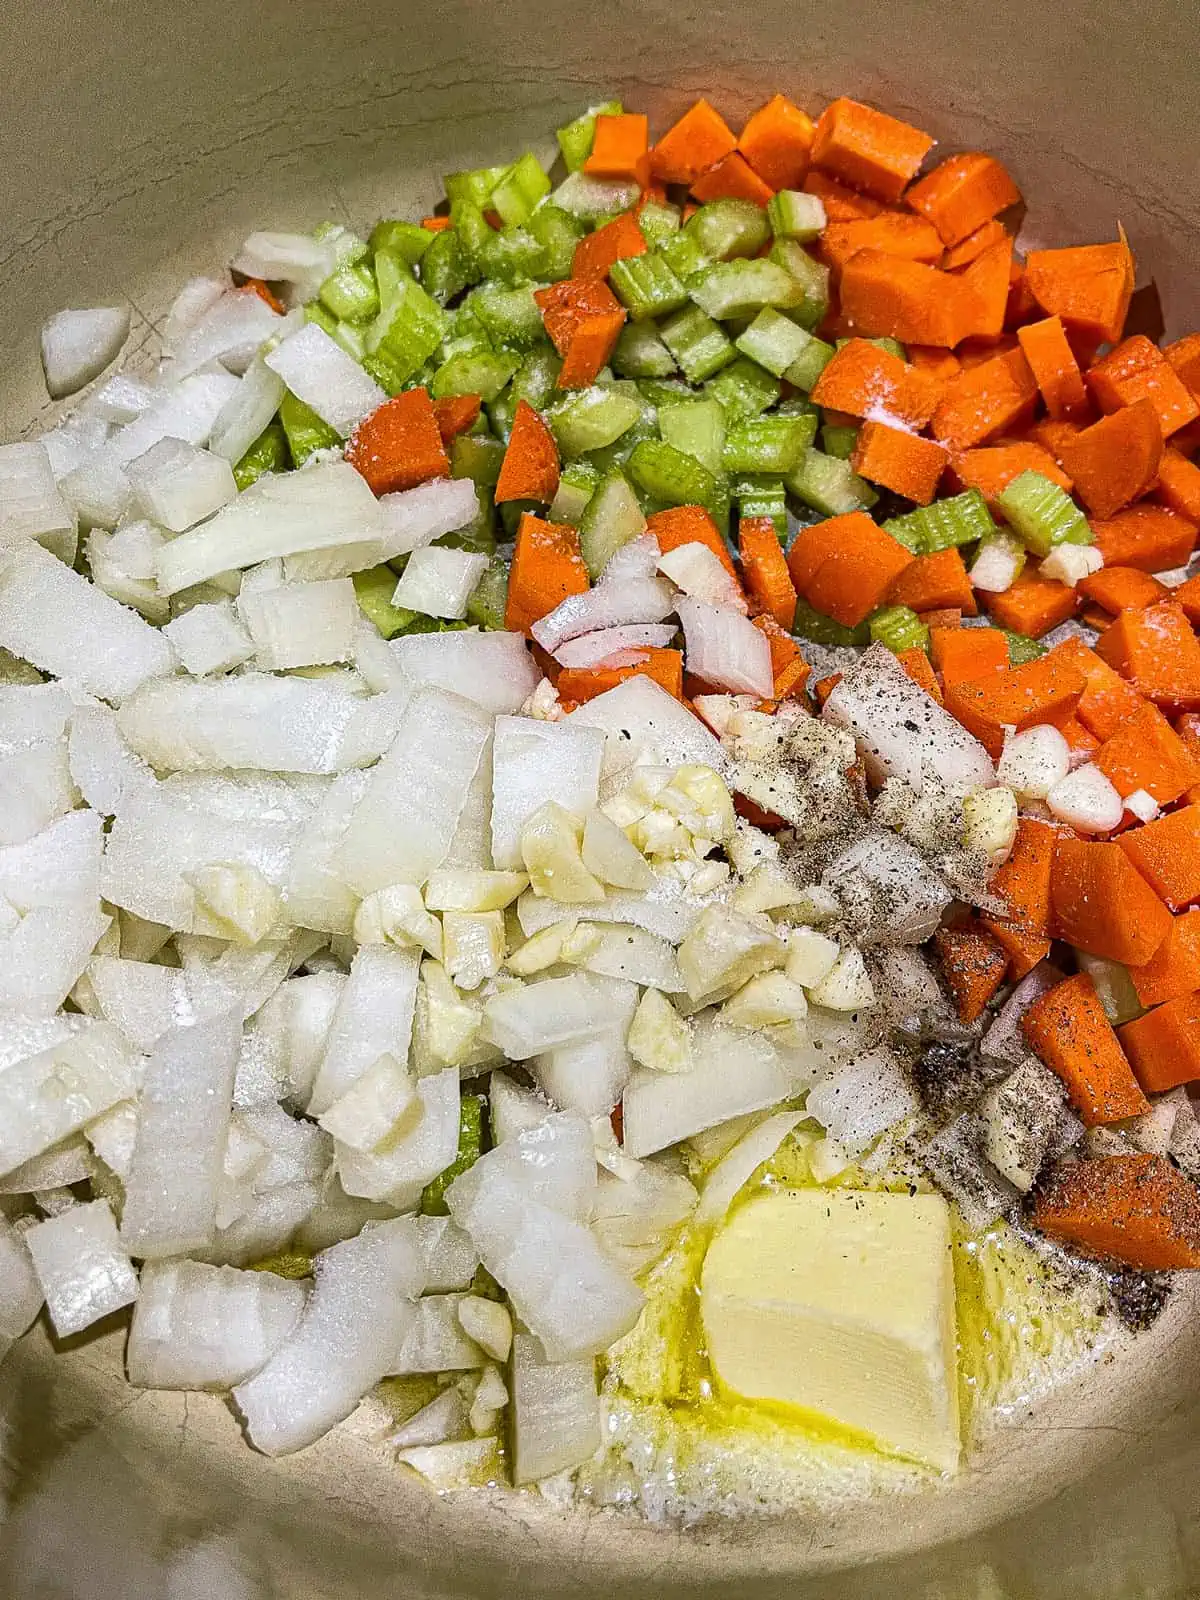 mirepoix - diced onions, carrots, celery, and garlic cooking with butter